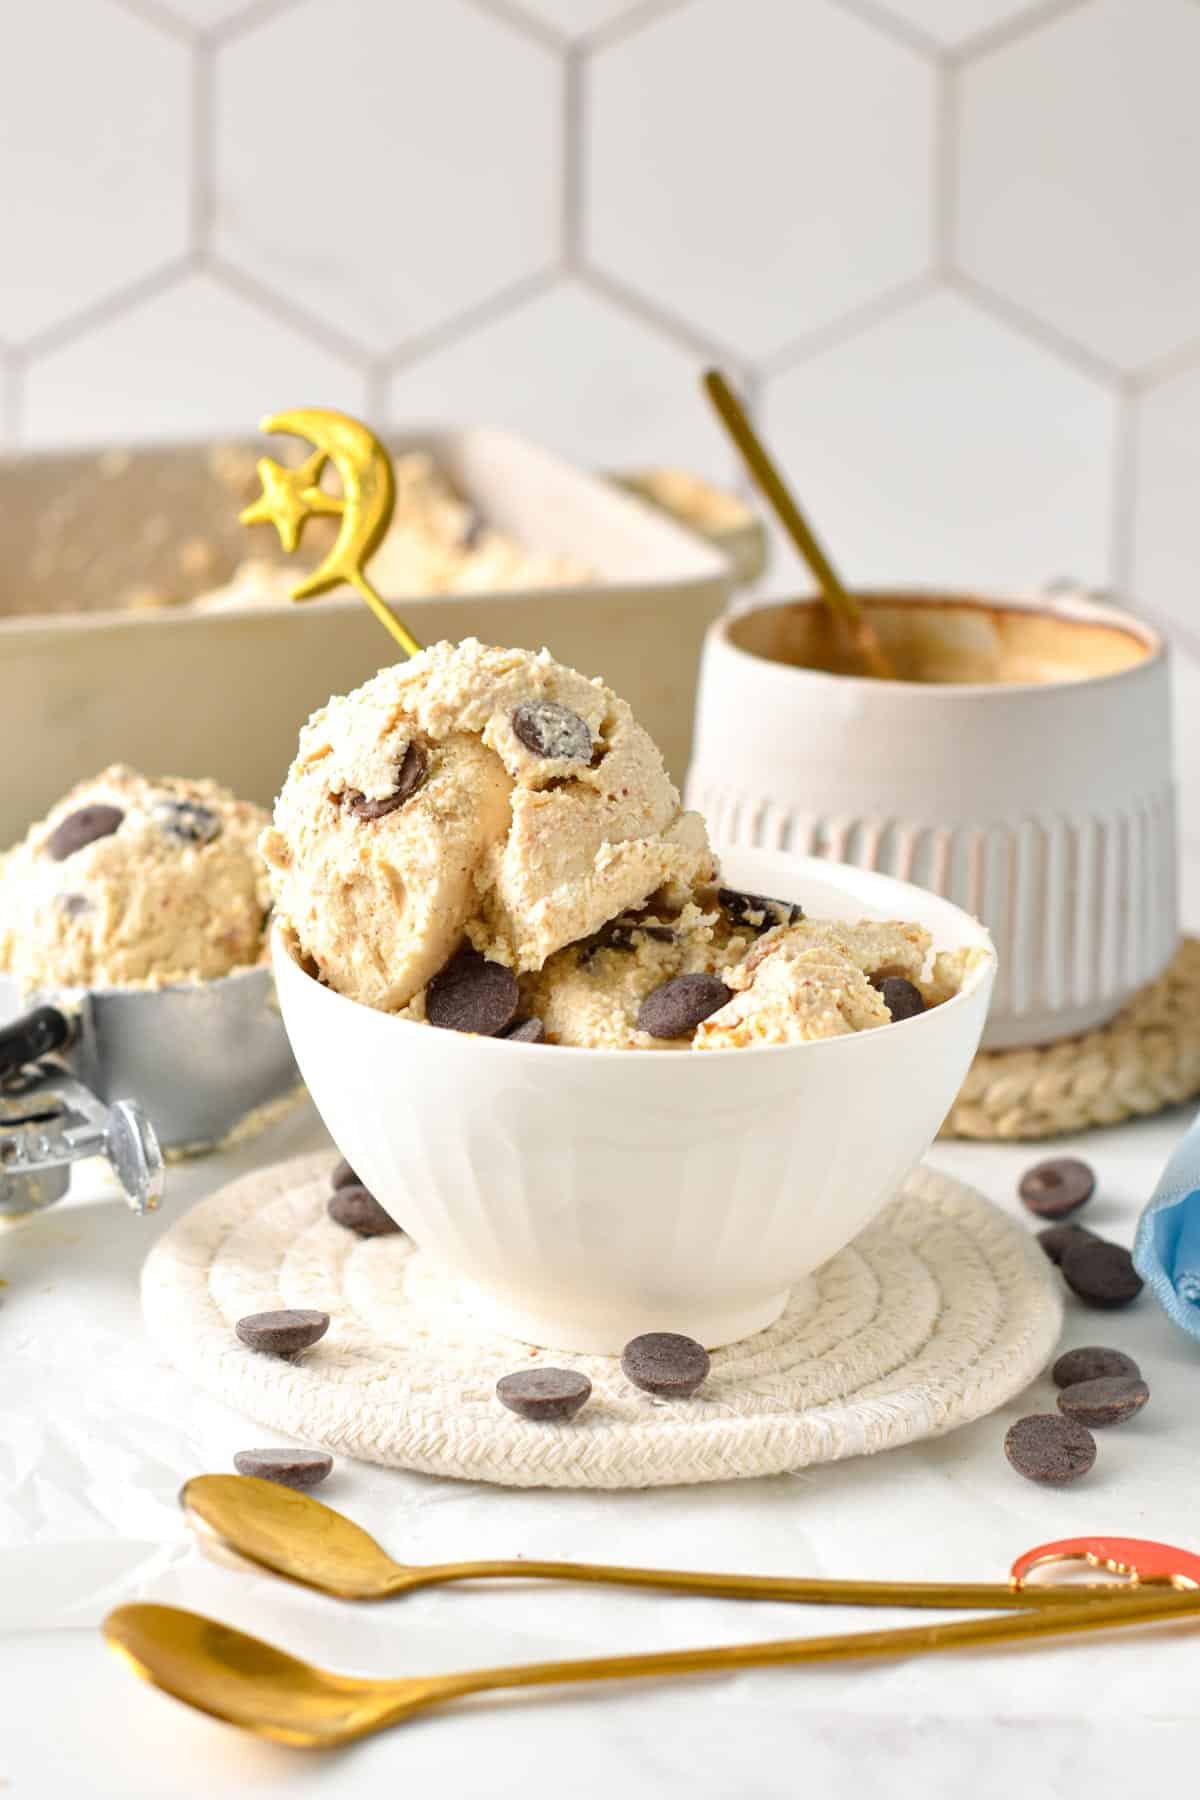 This Cottage Cheese is an easy 4-ingredients homemade ice cream recipe packed with protein and ultra-creamy texture.